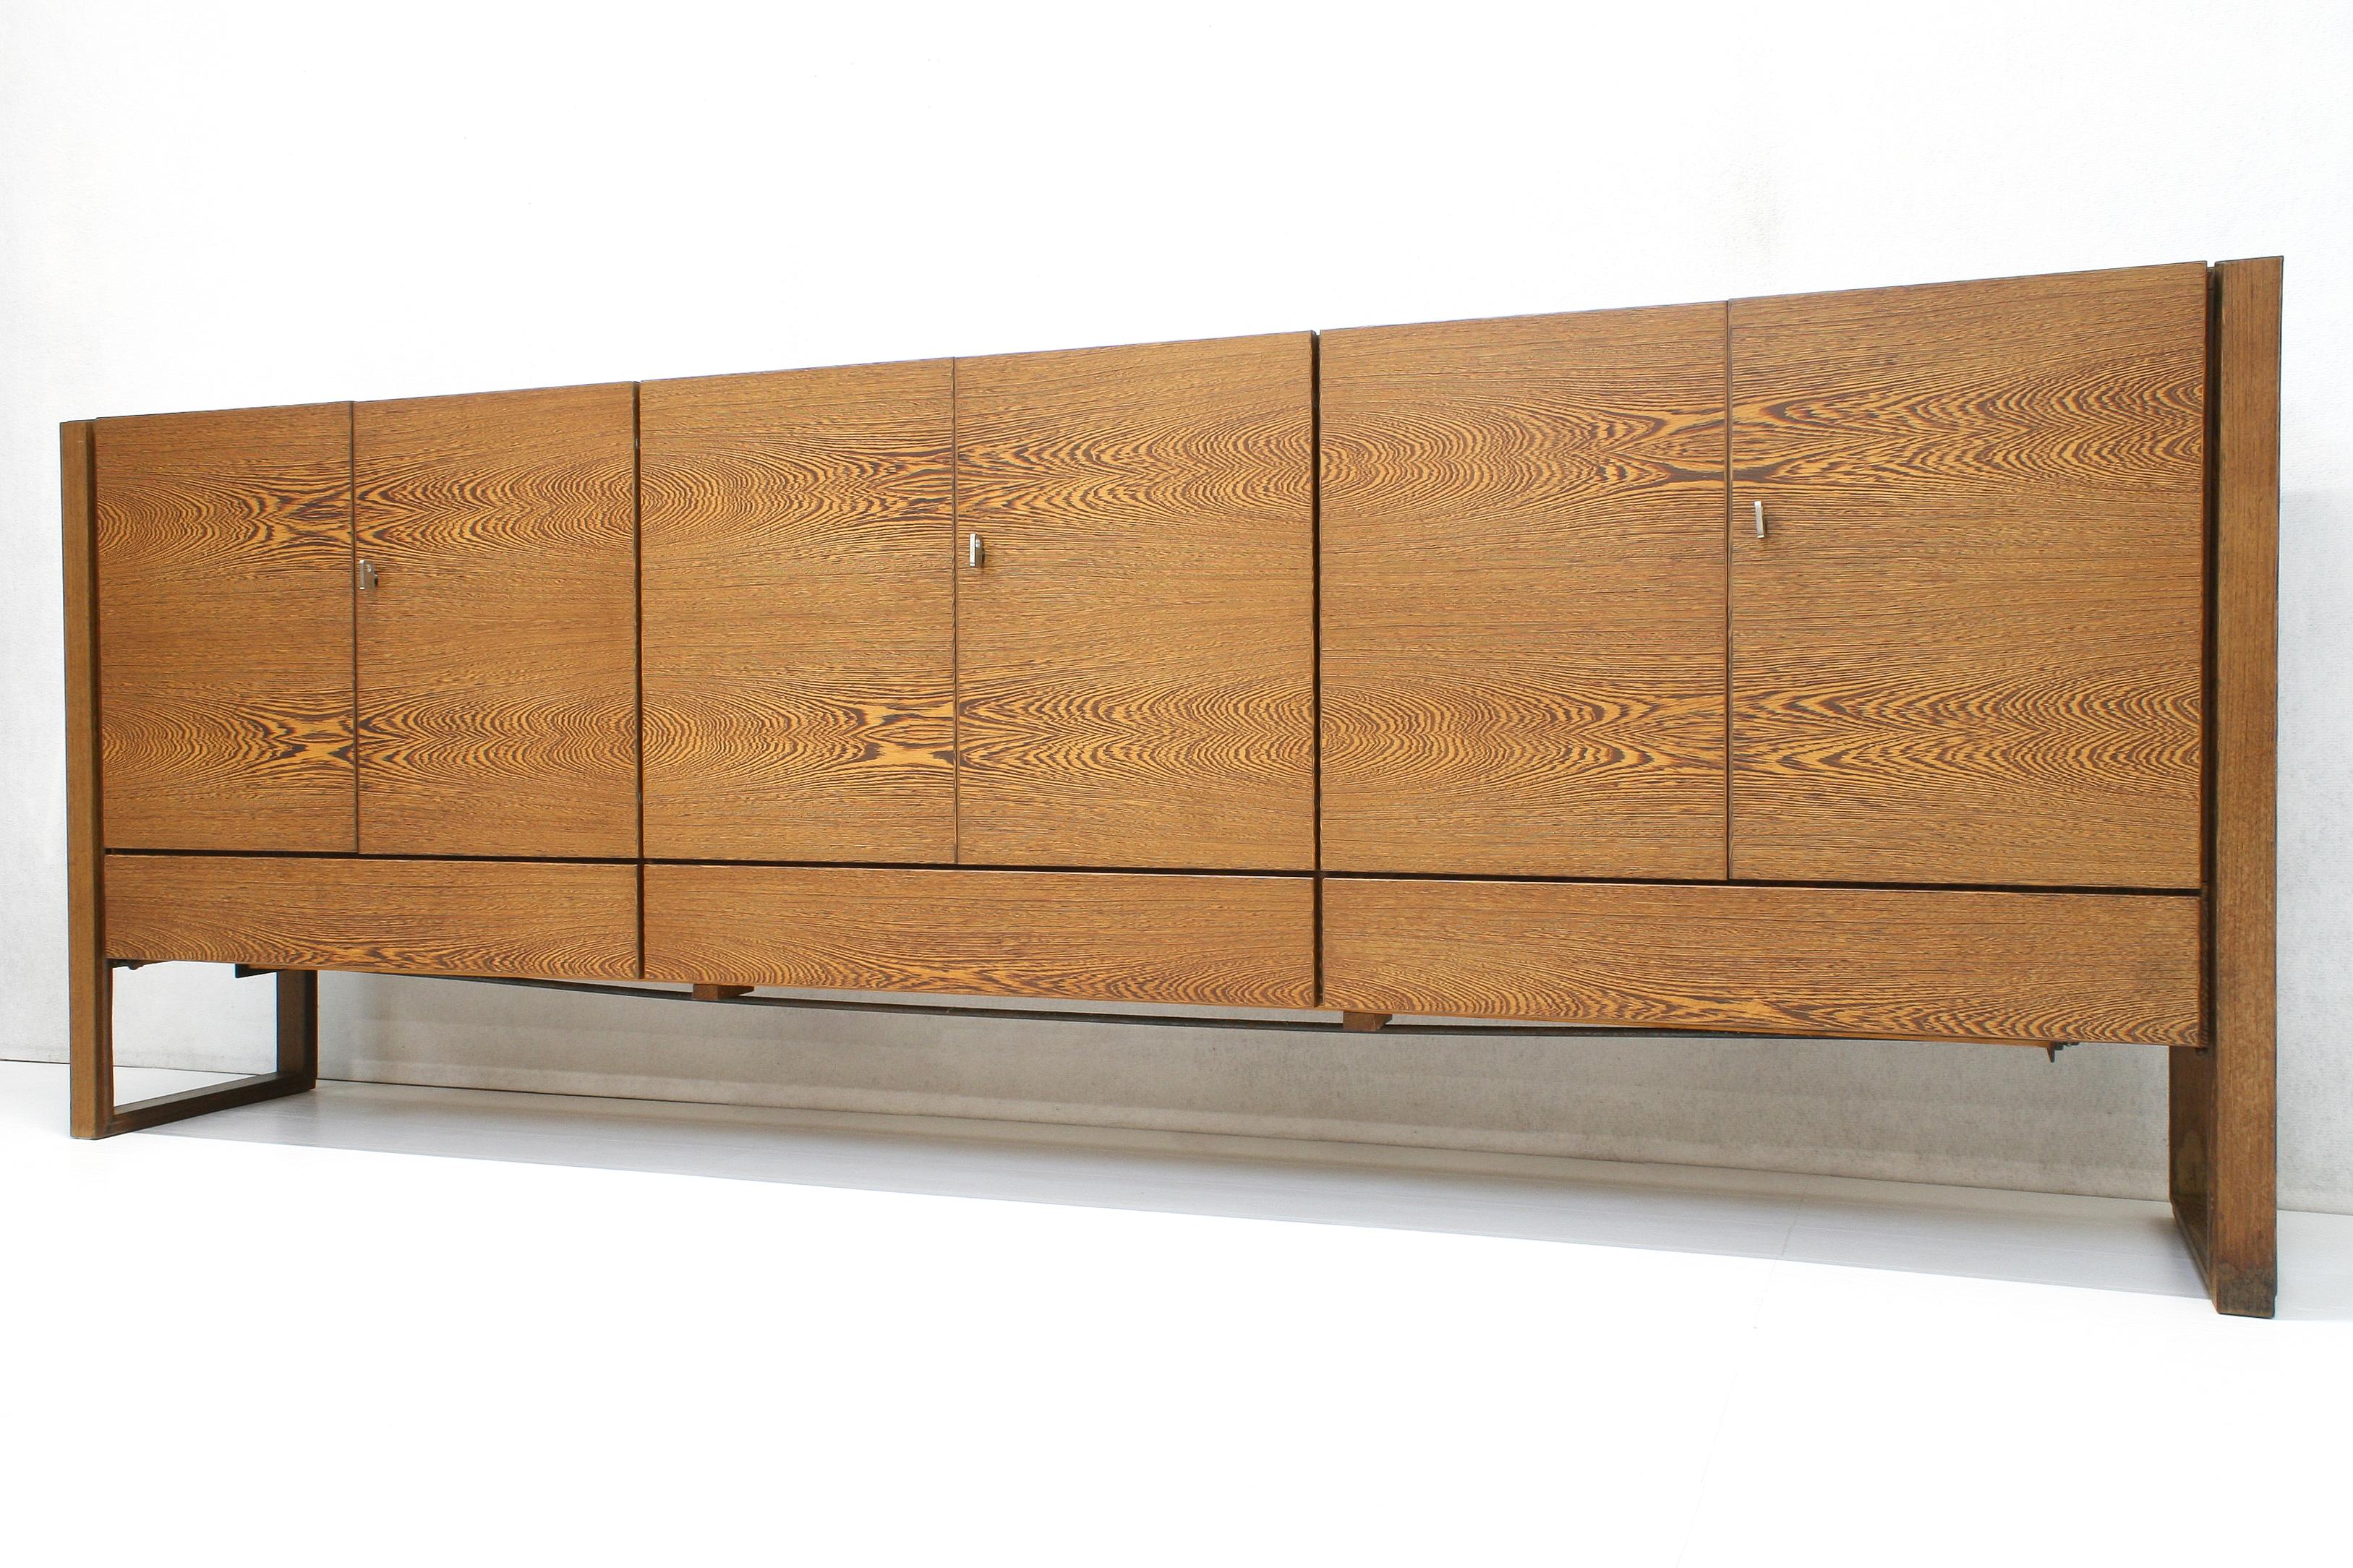 Belgian Sled Base Sideboard in Wengé from N-Line International, Belgium, 1970s For Sale